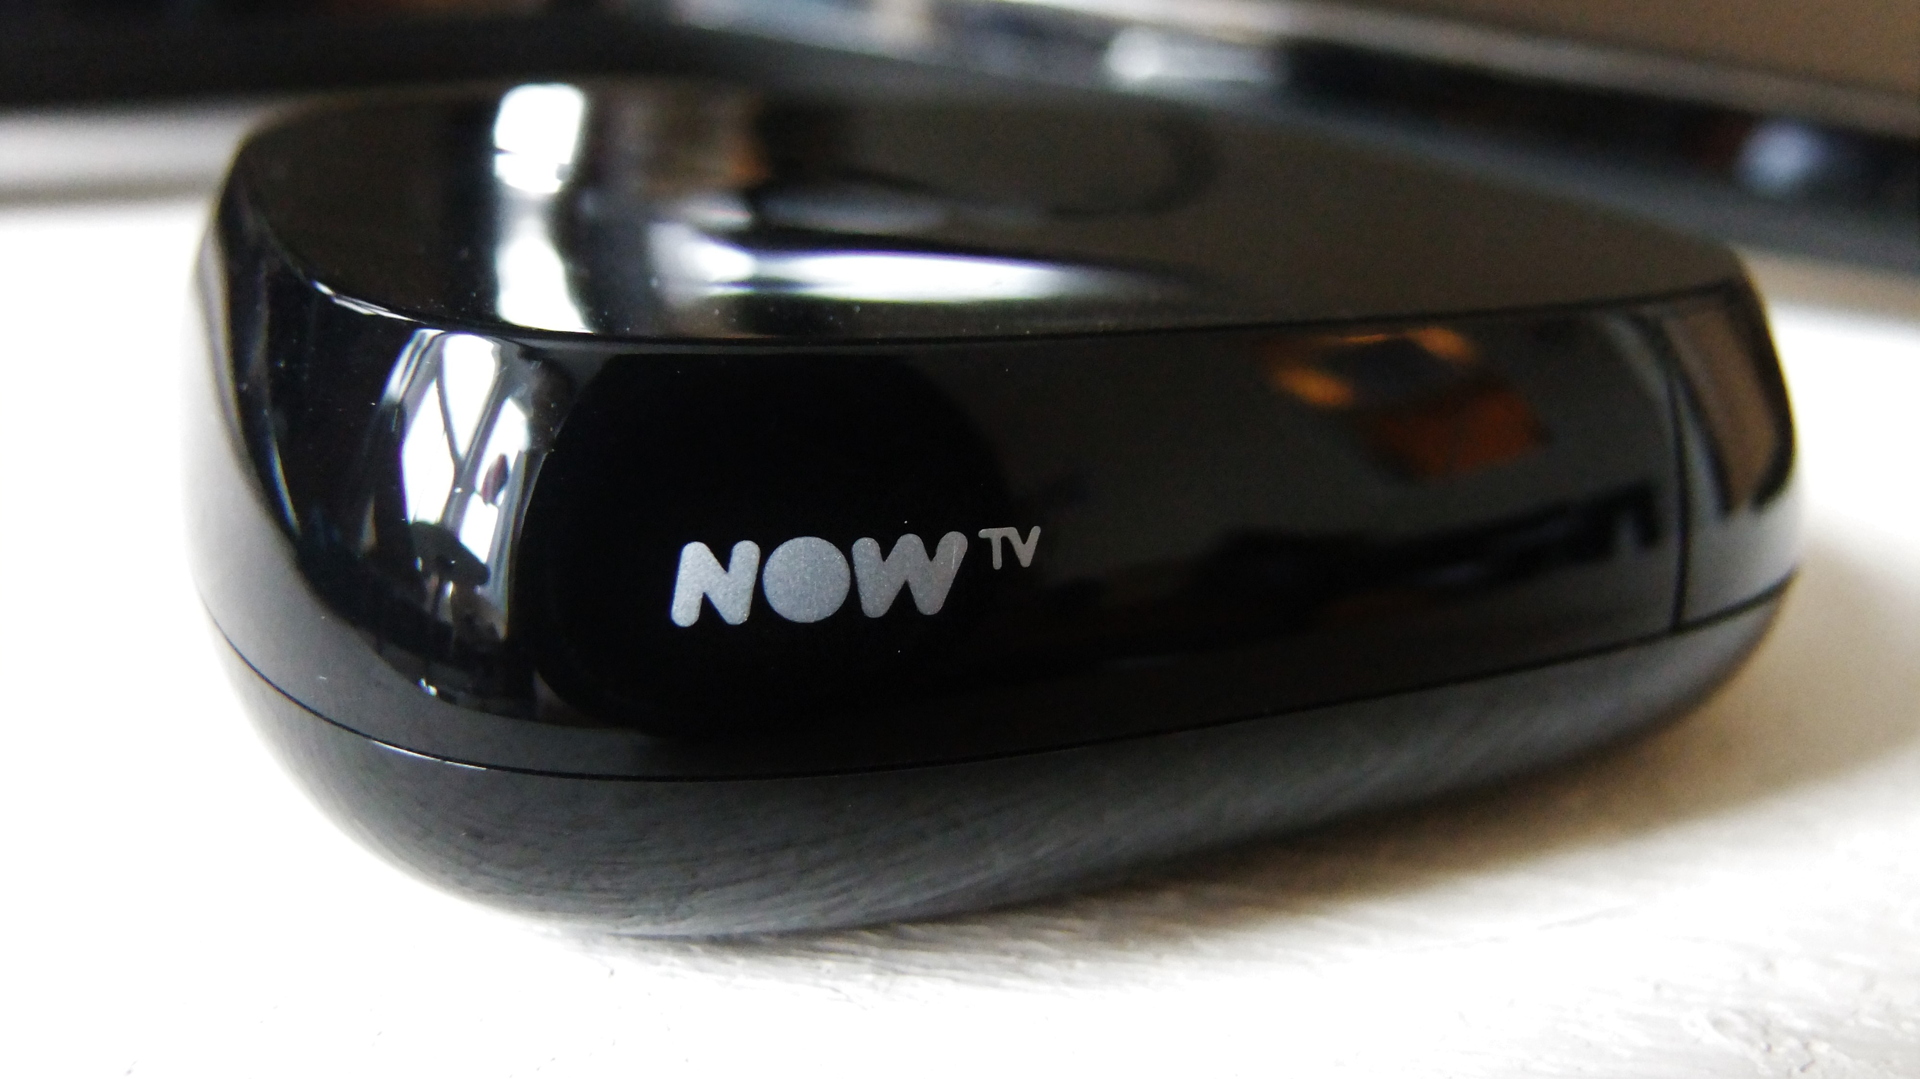 What Is A NOW TV Box?